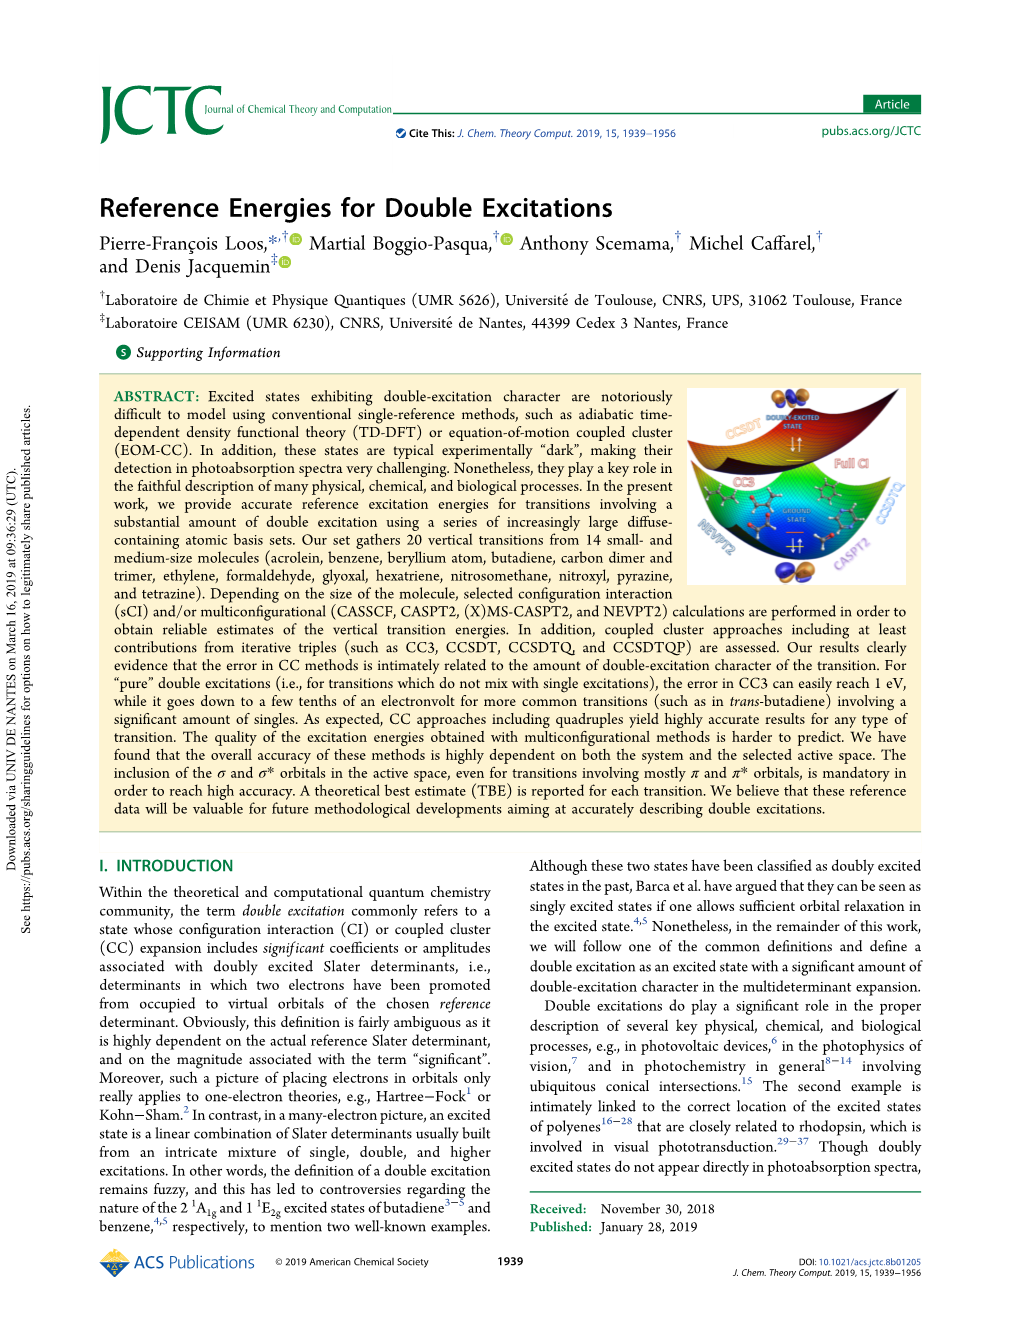 68. Reference Energies for Double Excitations